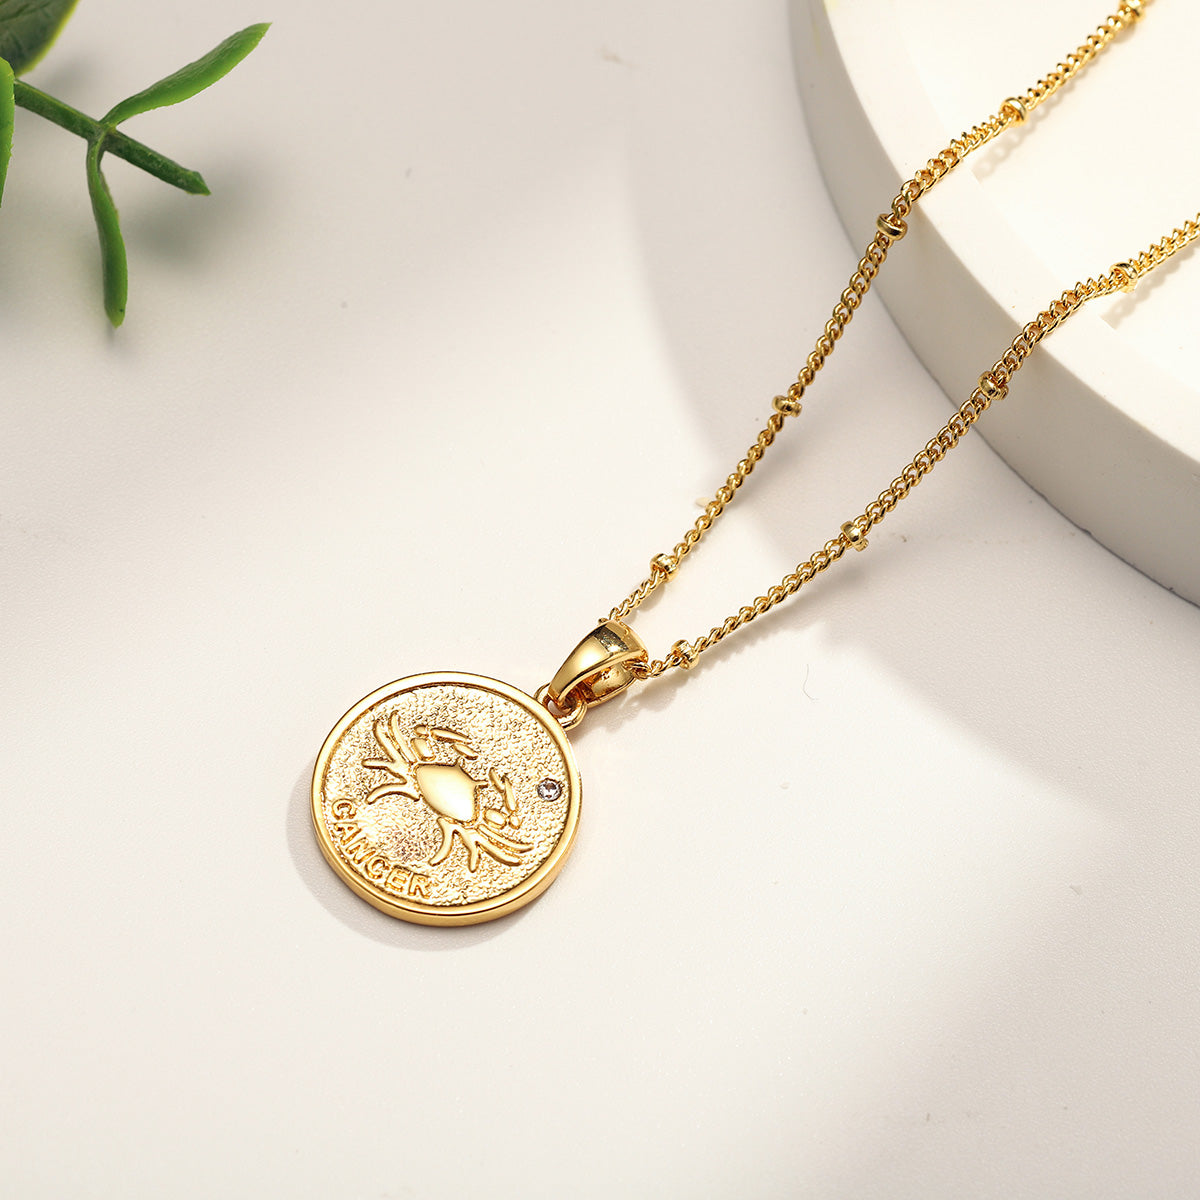 Cancer Constellation Coin Pendant Brass Necklace